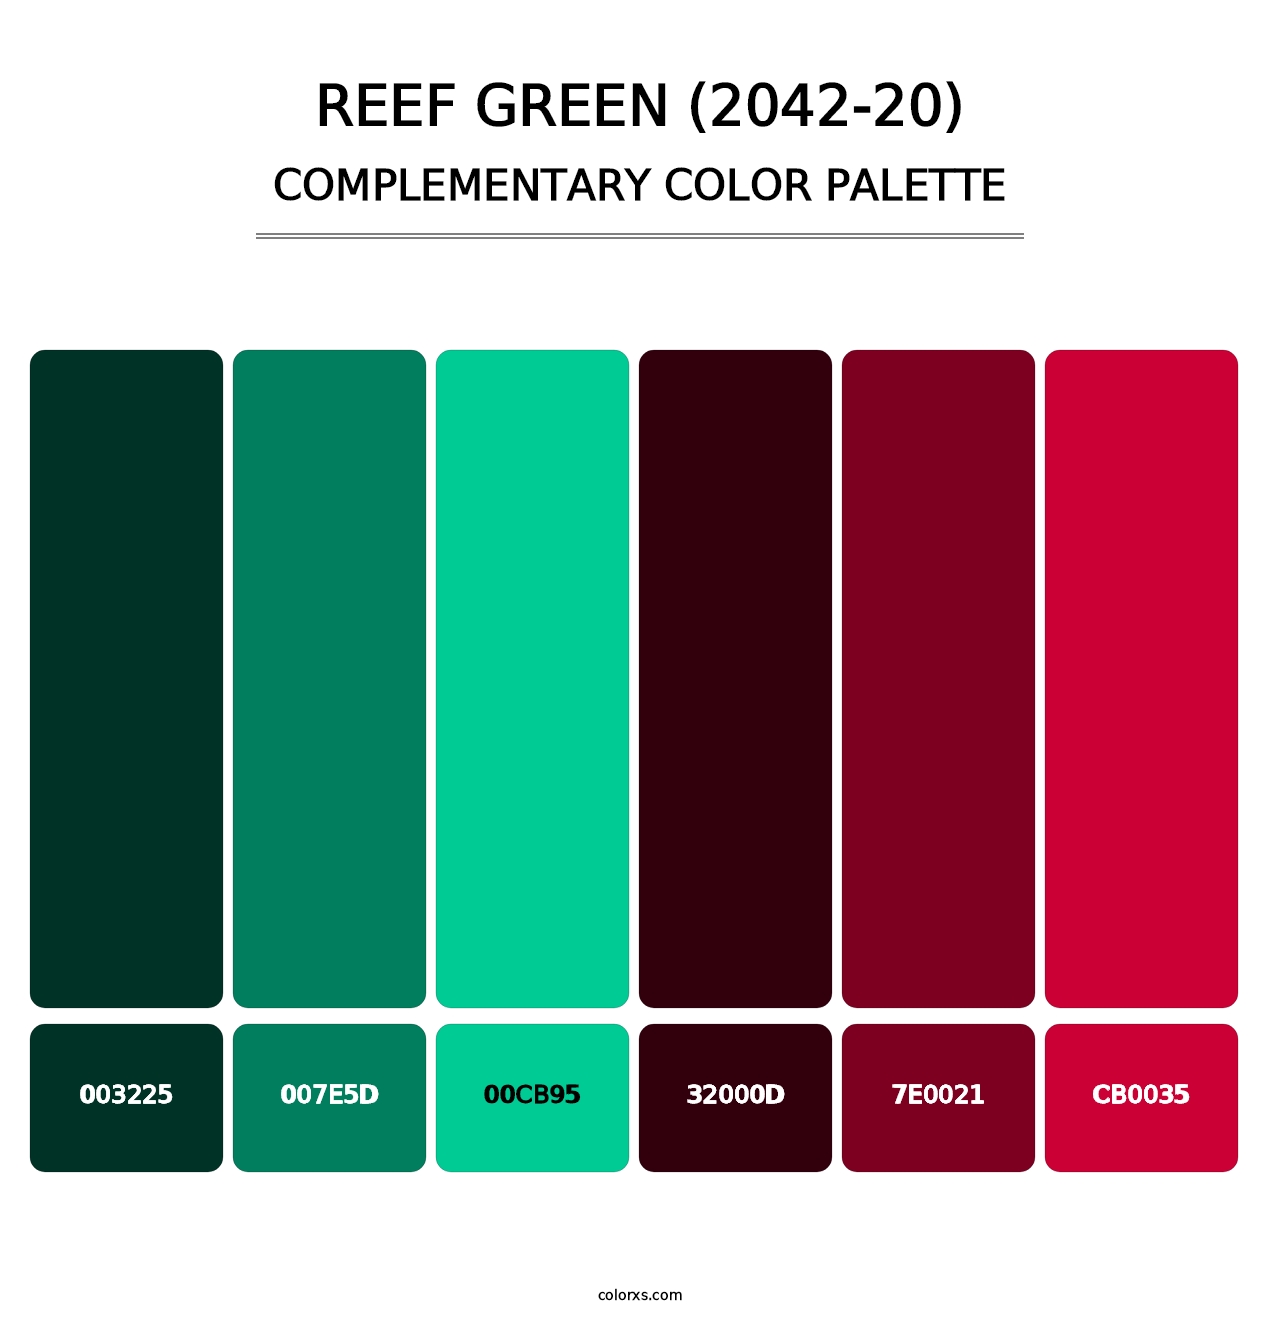 Reef Green (2042-20) - Complementary Color Palette